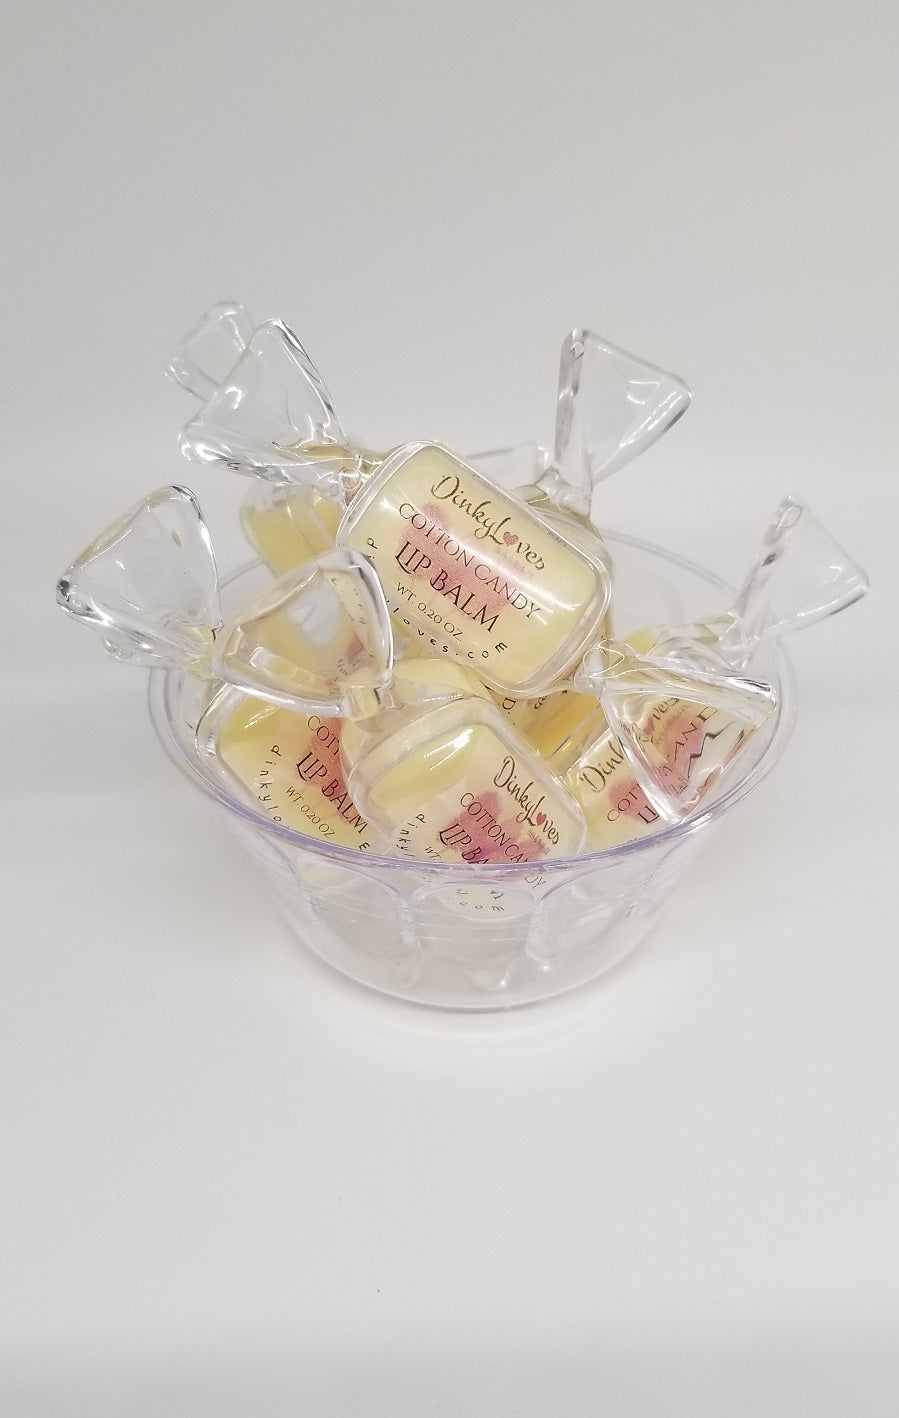 LIP BALM CANDY Shaped Container / Lip Balm / Lip Butters